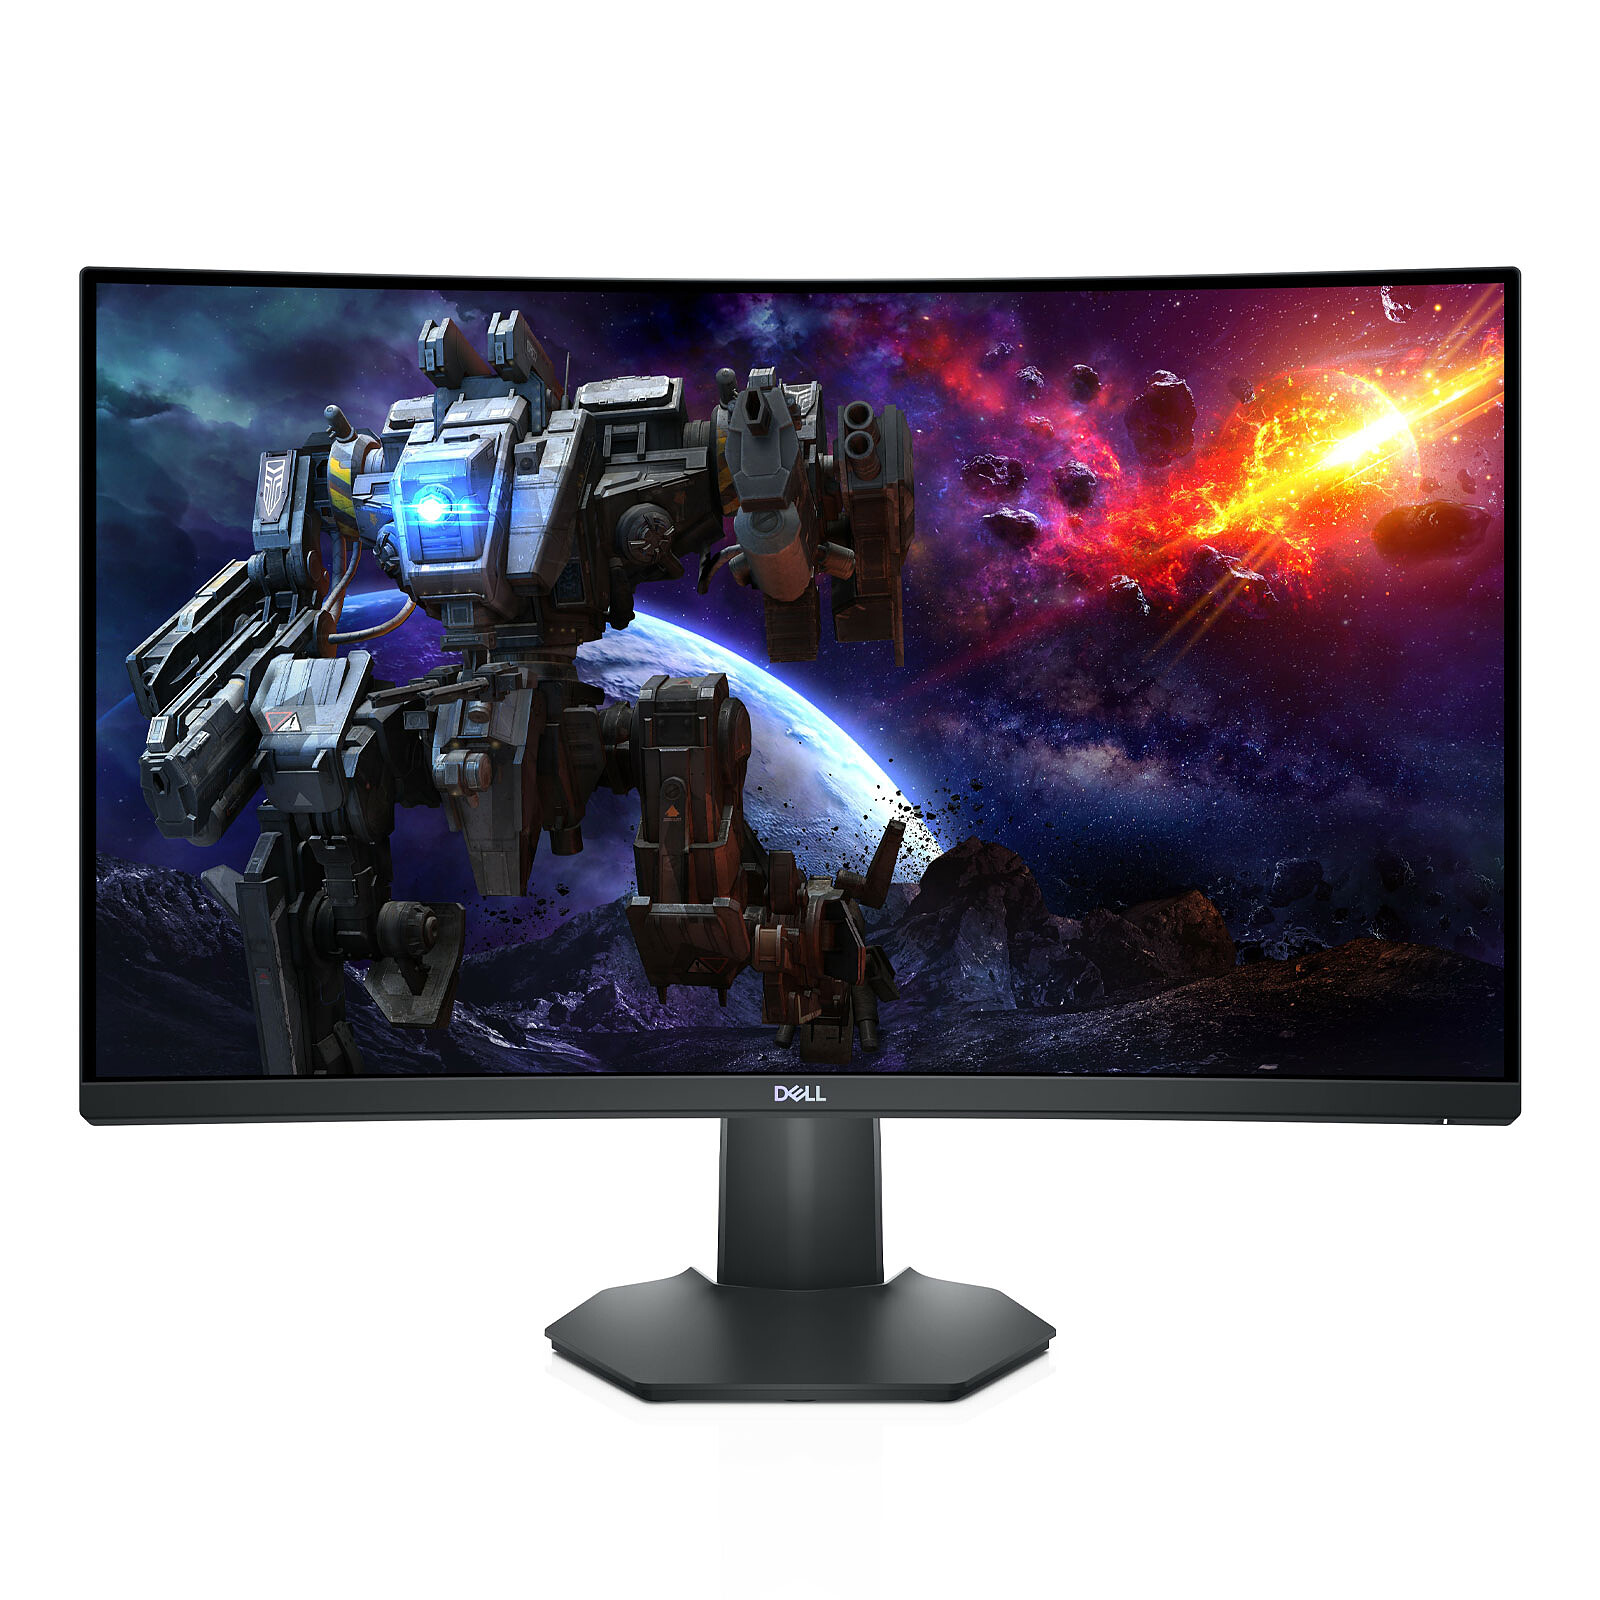 Dell 27 LED - S2722DGM - PC monitor - LDLC 3-year warranty